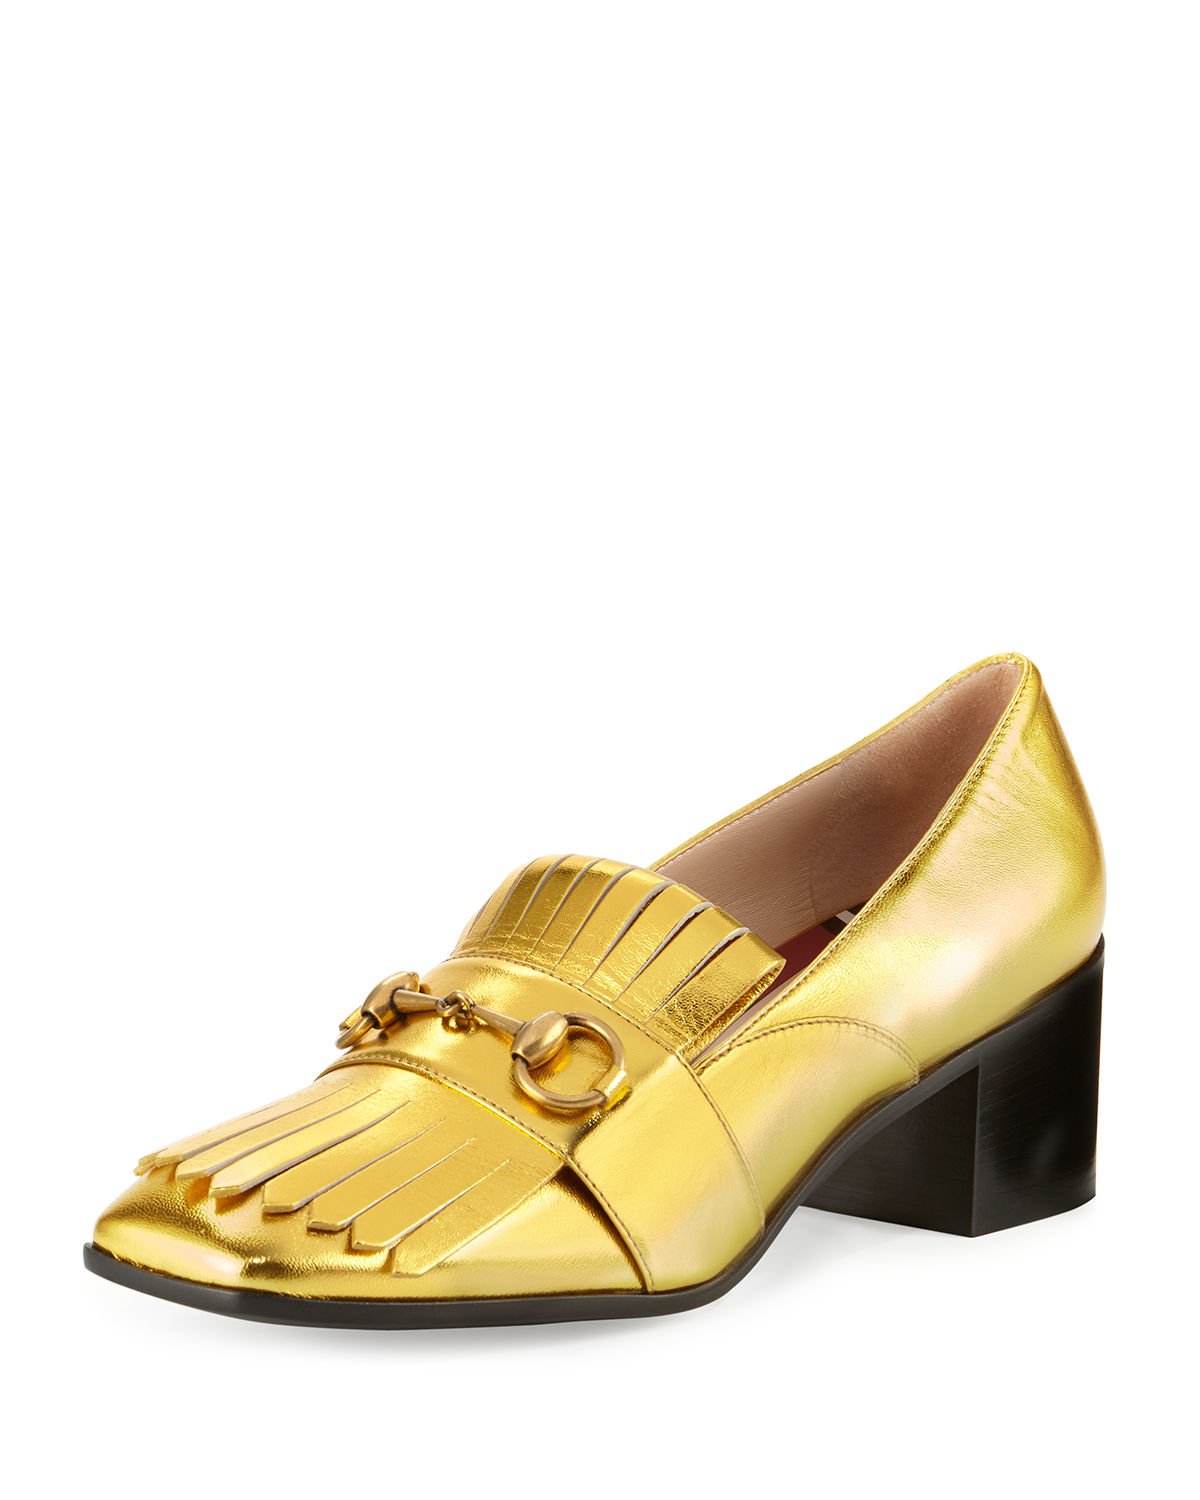 Gucci Polly Kiltie Leather 55mm Loafer in Gold (Pink) - Lyst